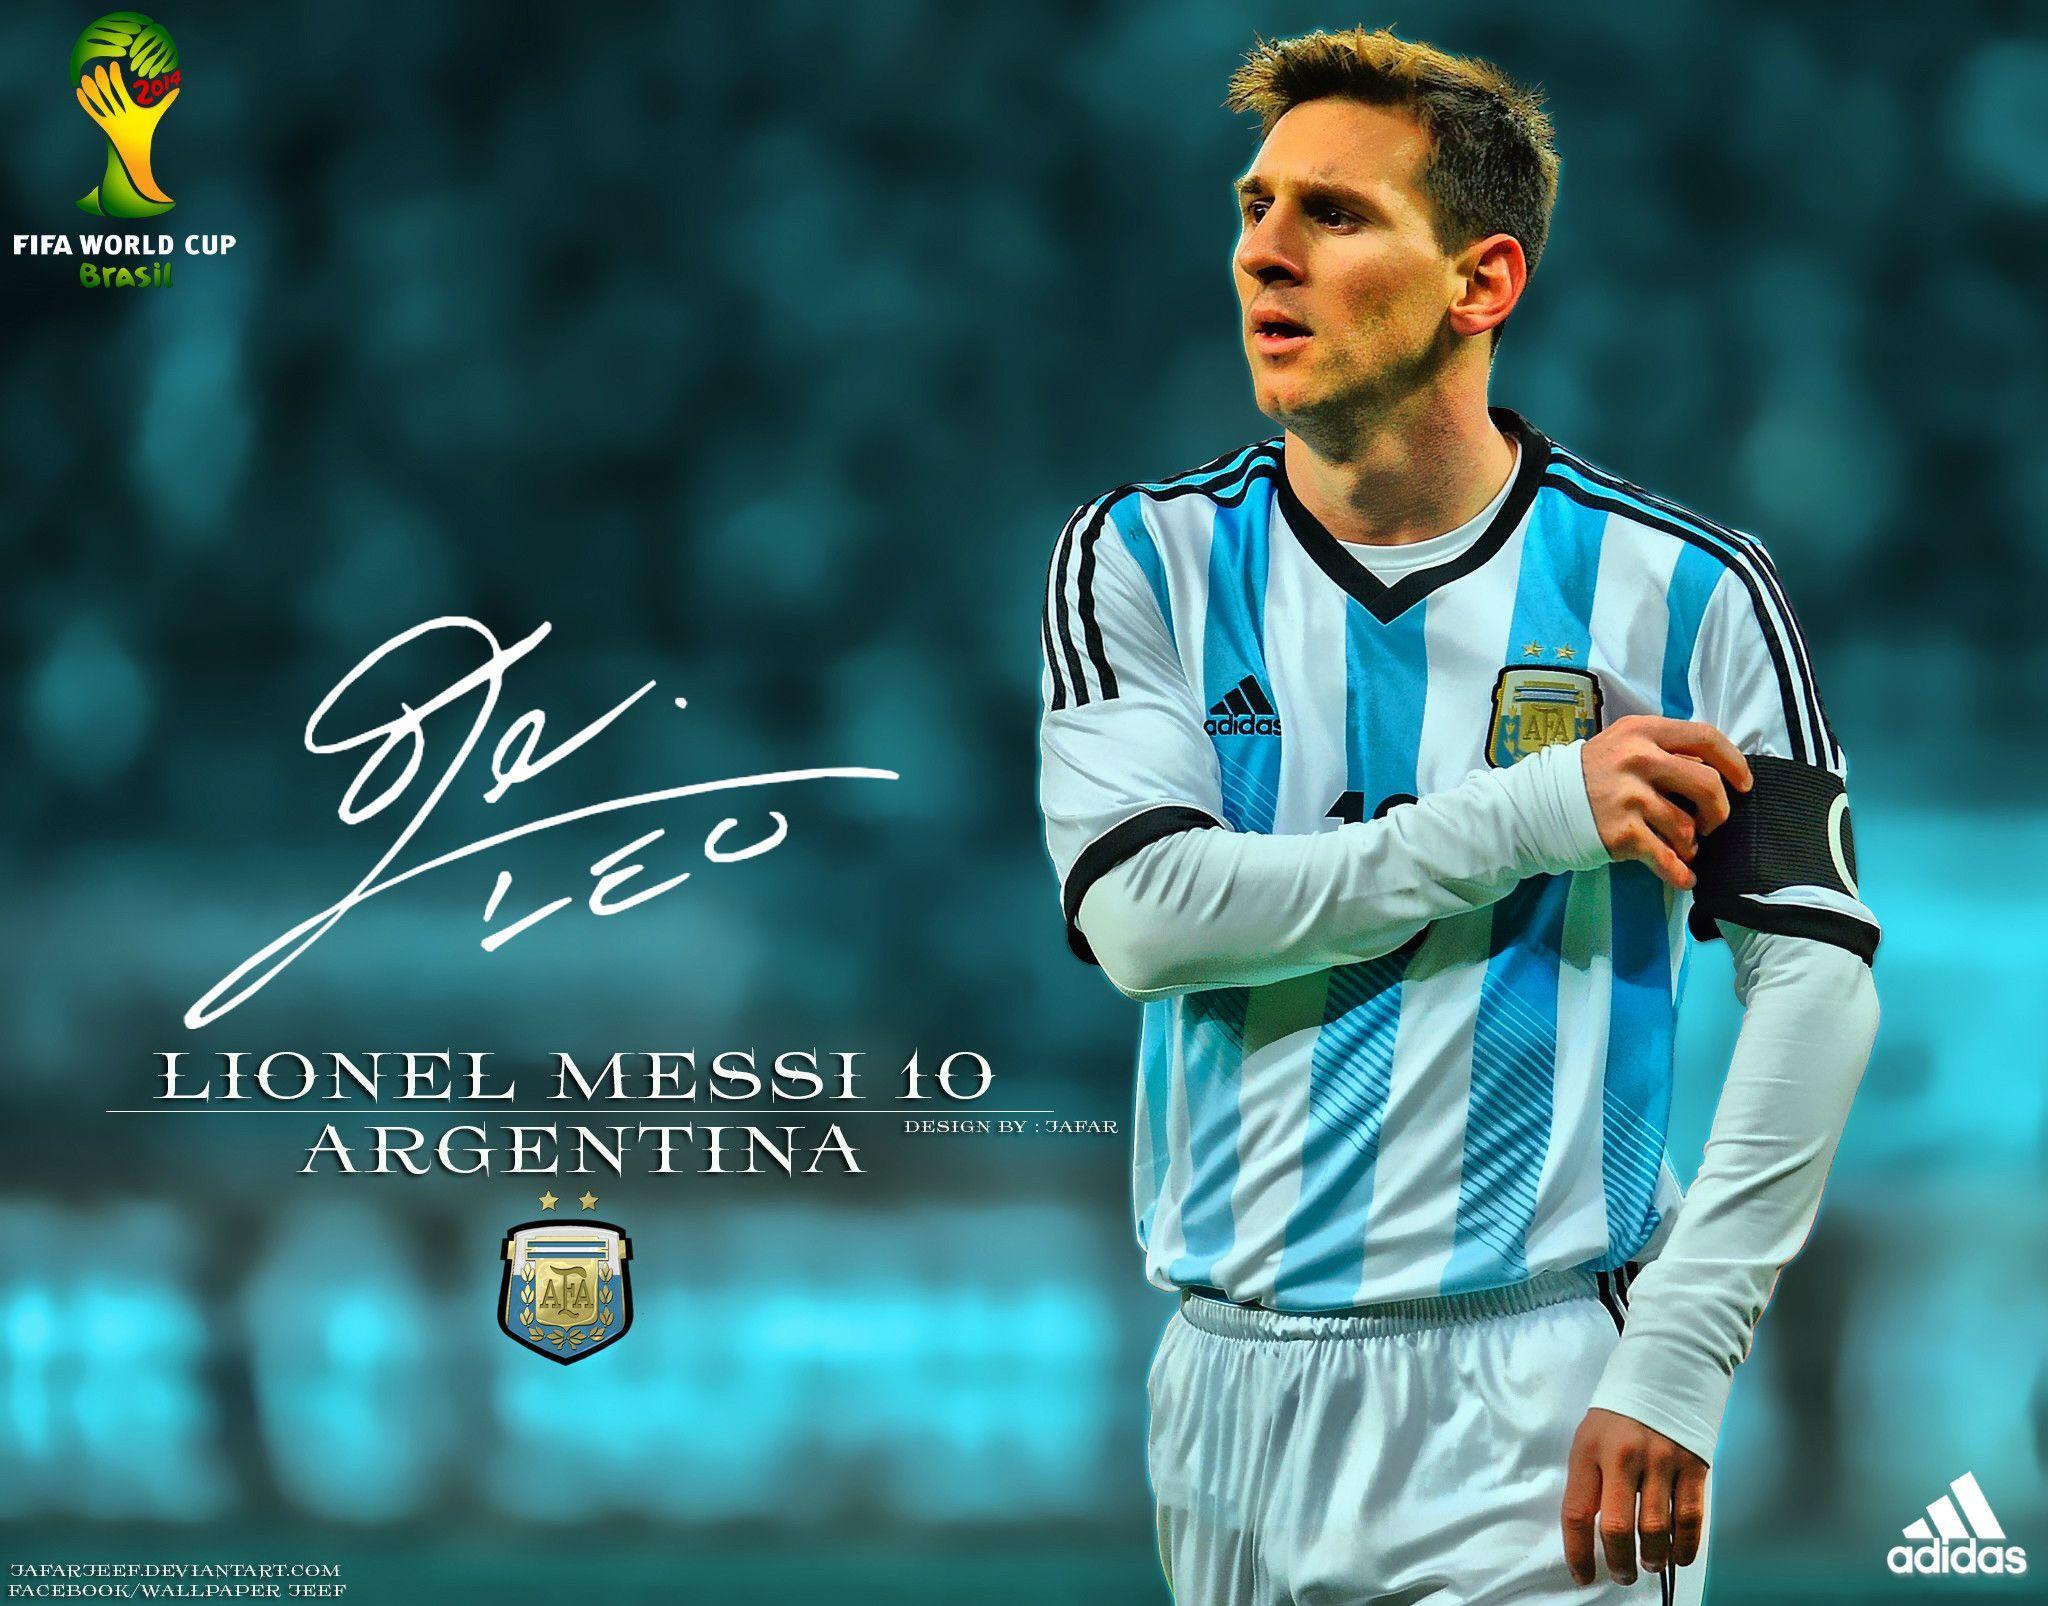 Wallpaper For > HD Wallpaper Of Lionel Messi